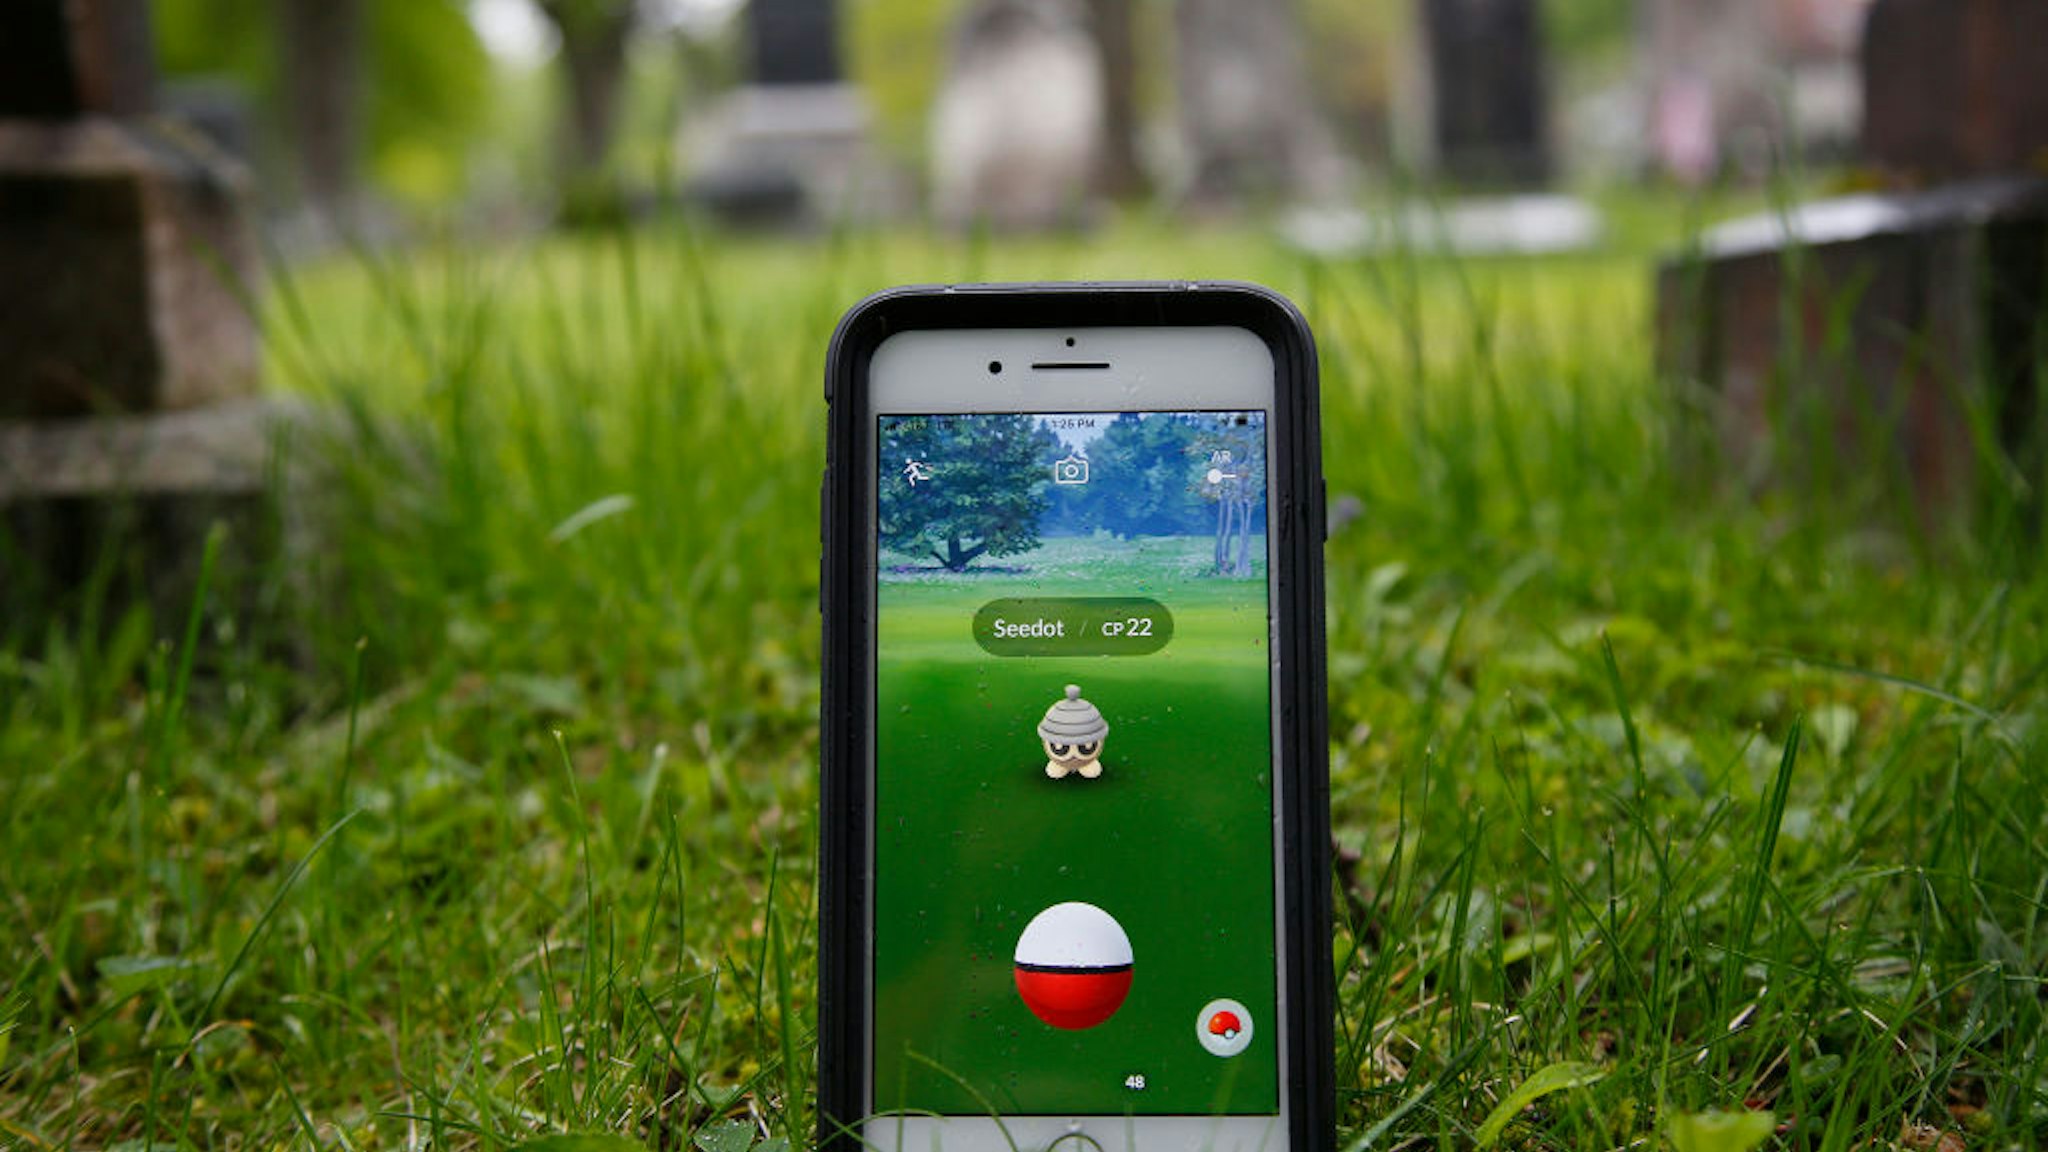 Evergreen Cemetery in Portland has been a spot where Pokemon Go players have gone to play.